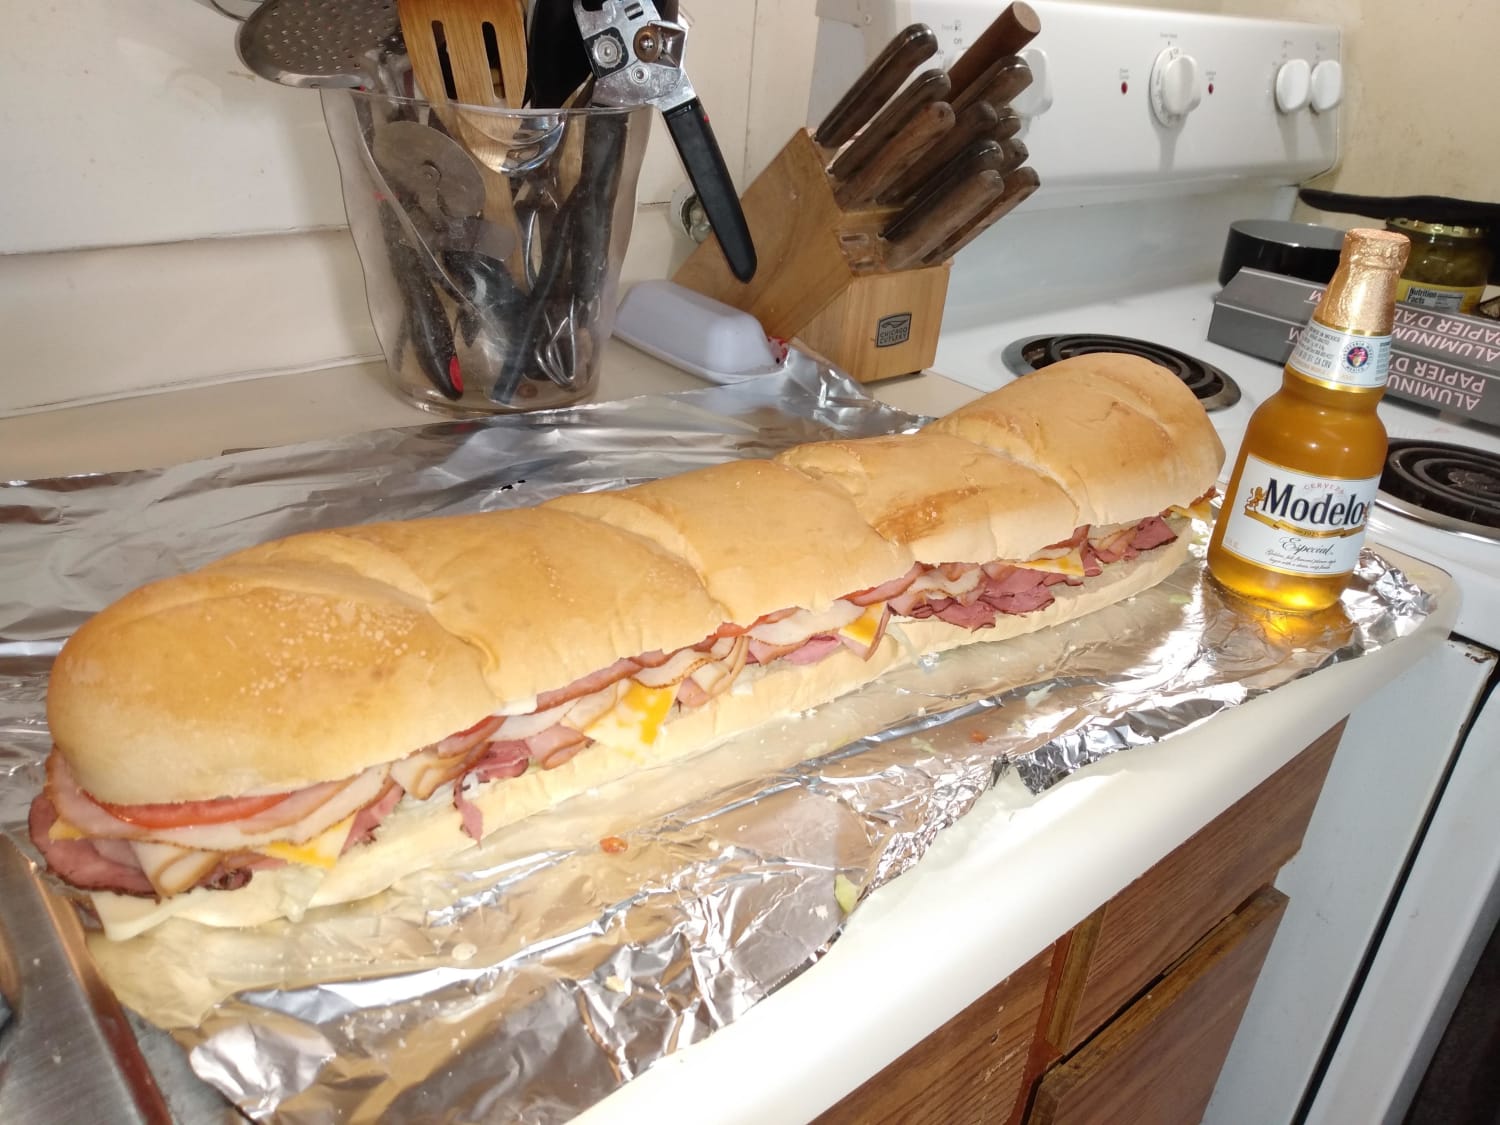 [Homemade] Comically large 4 meat, 3 cheese submarine sandwich. Modelo for scale.